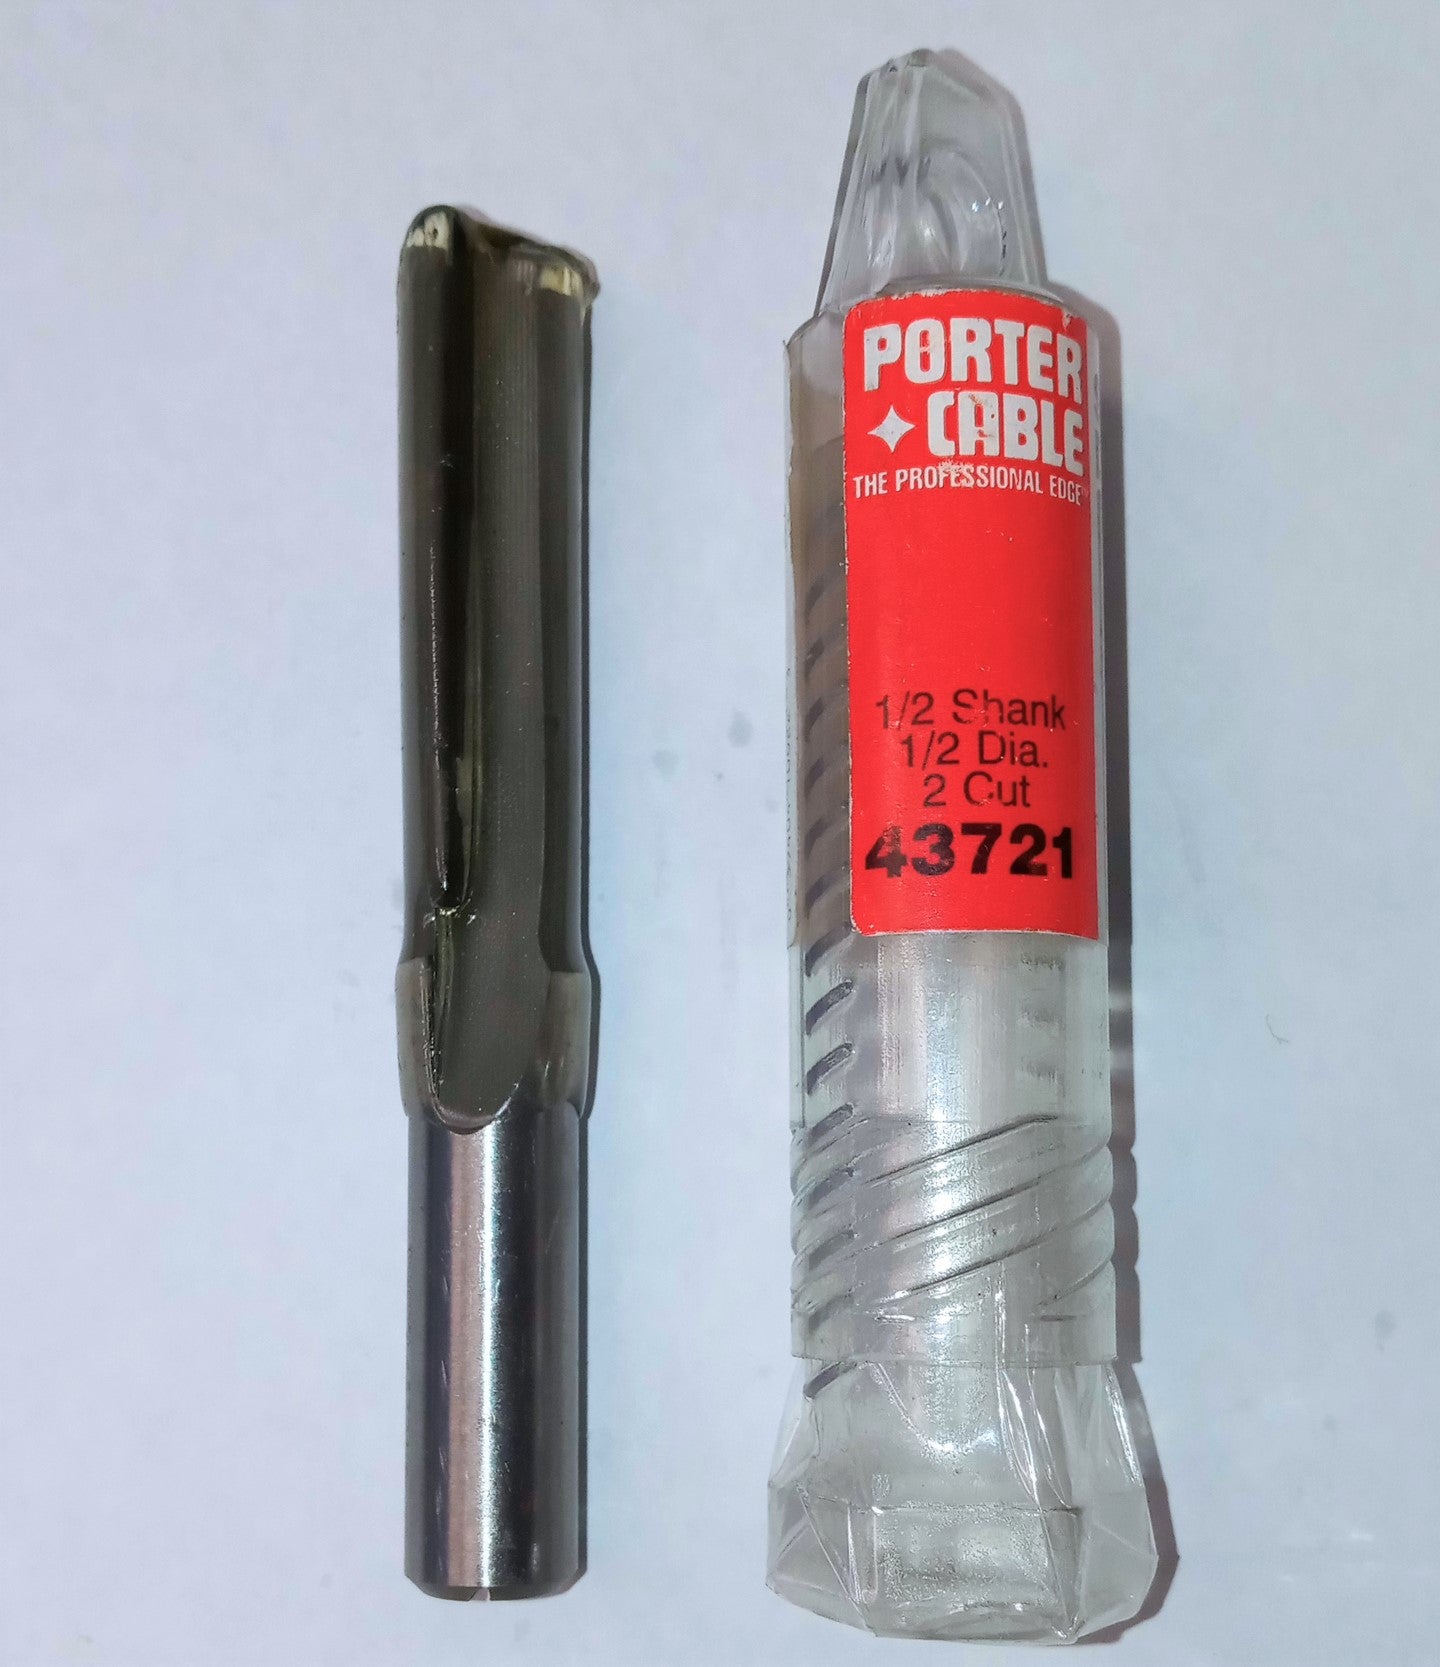 Porter-Cable 43721 Straight Double Flute Plunge Cutting Router Bit 1/2" Dia USA